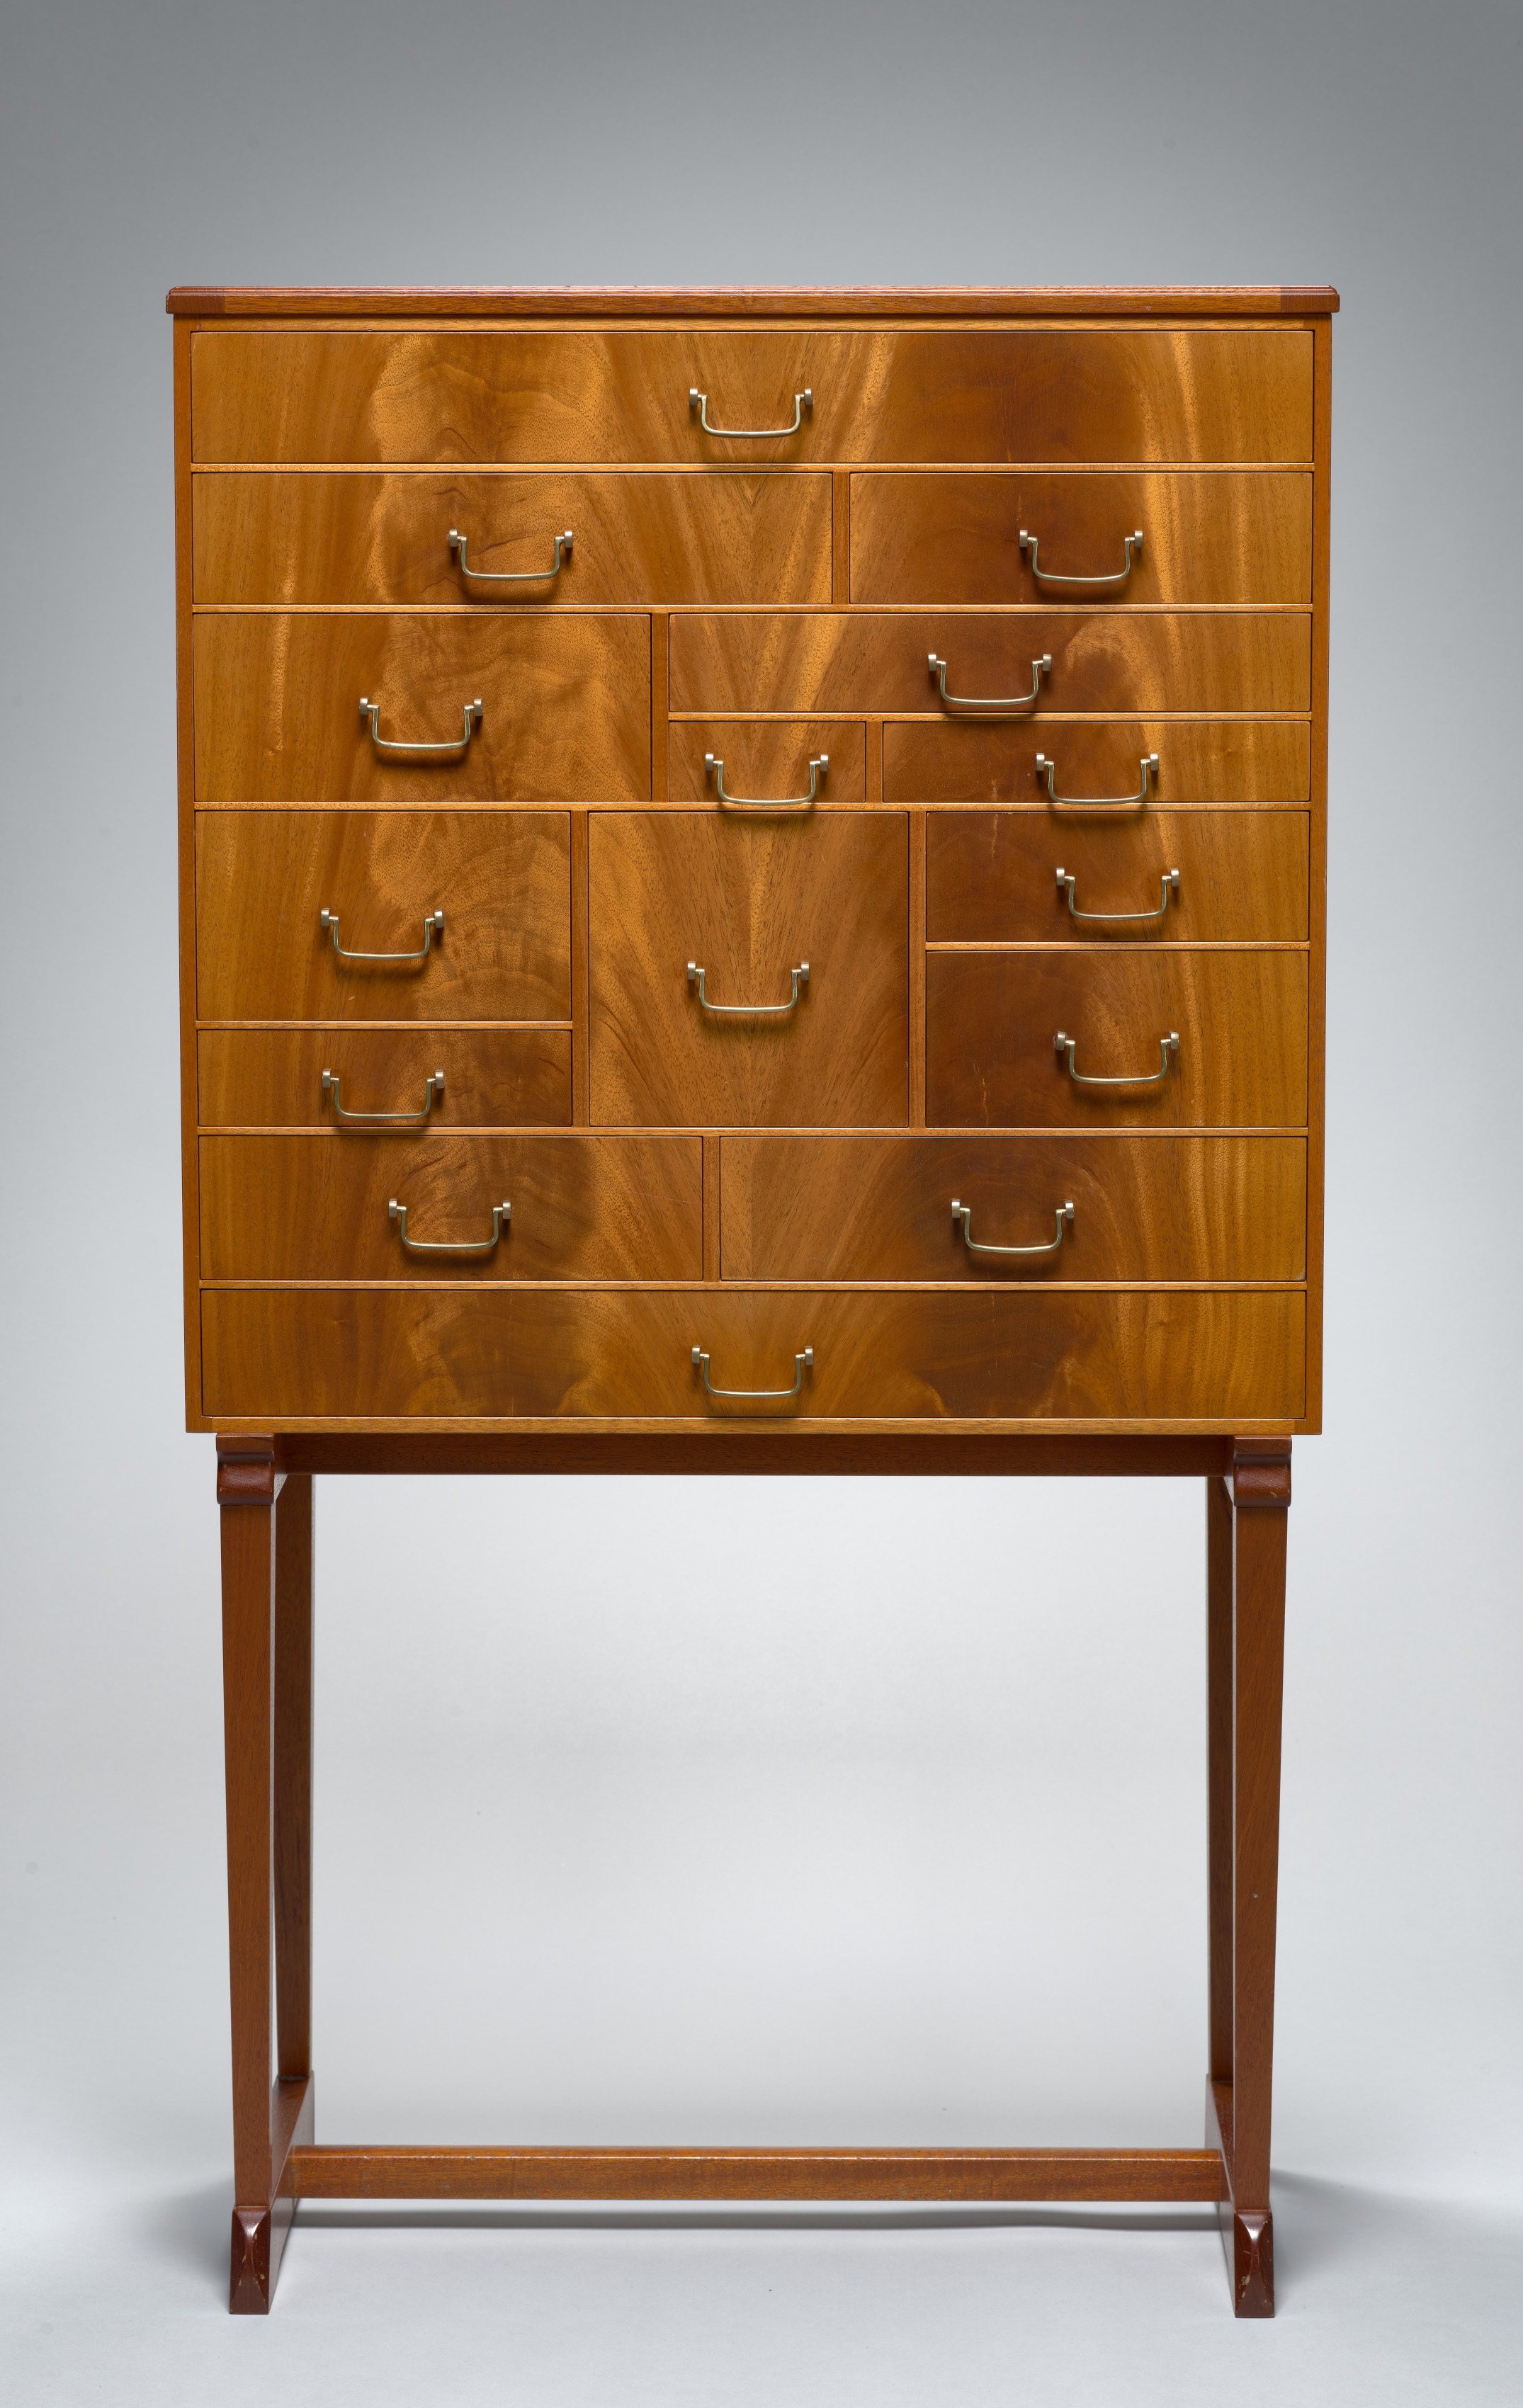 Cabinet on Stand (2030)